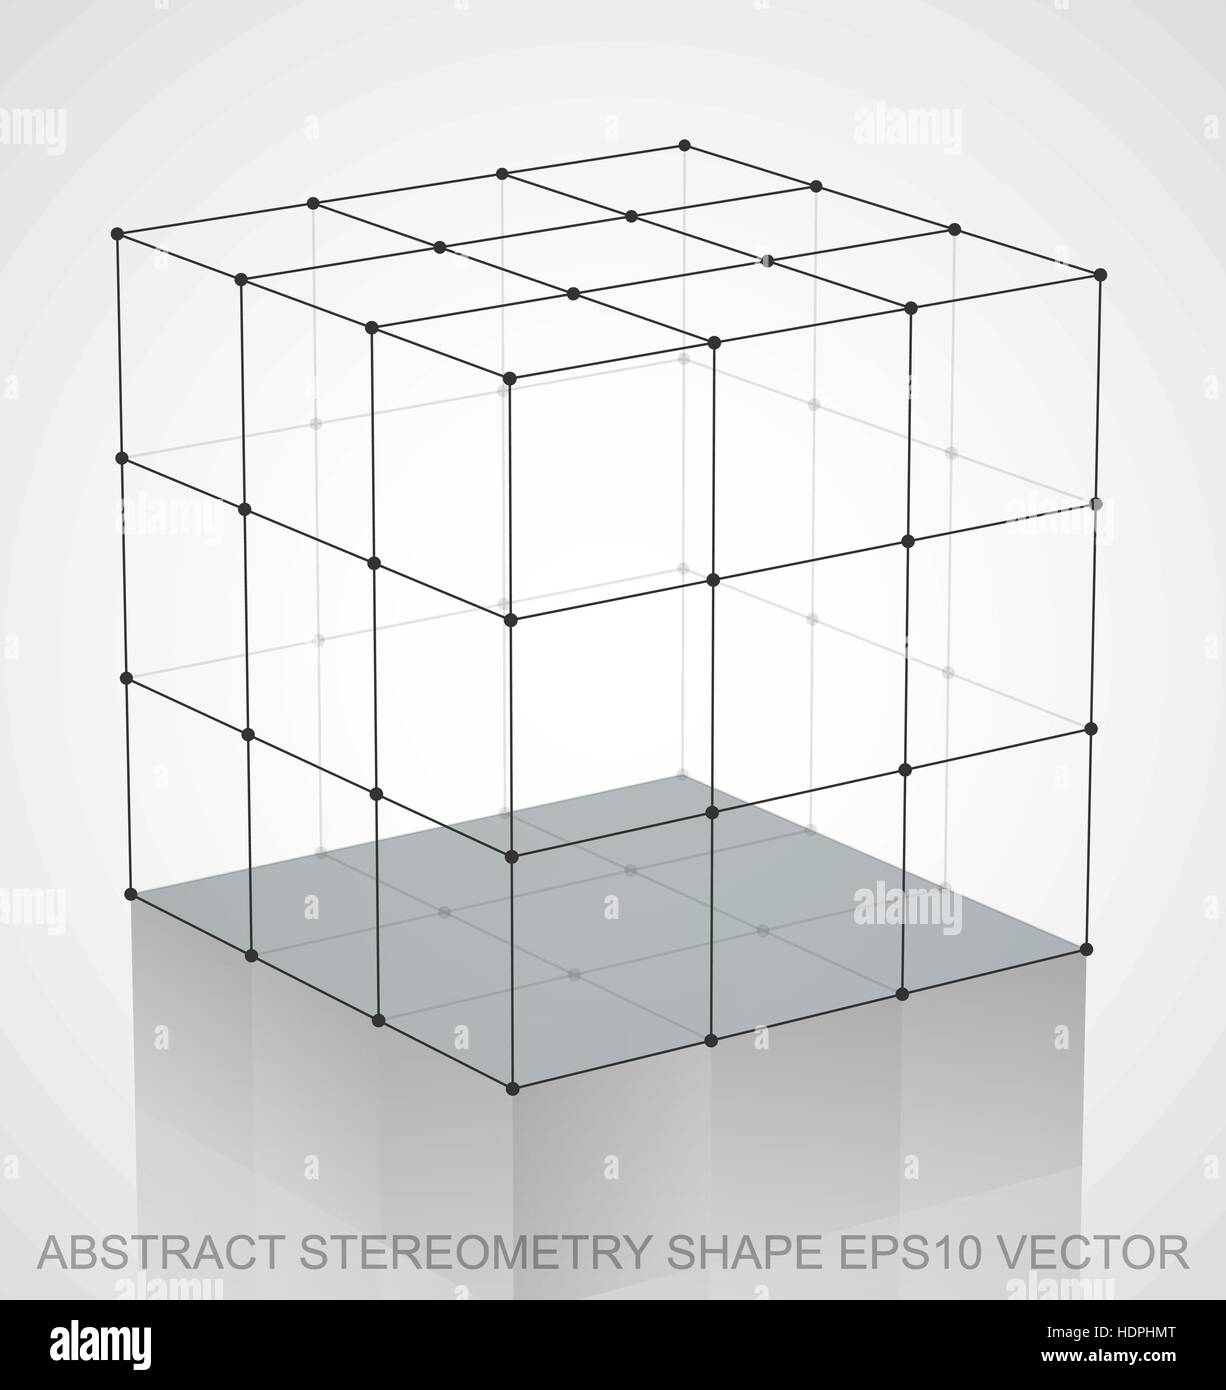 Part A: 'Abstract Start with a cube. Sketch out a